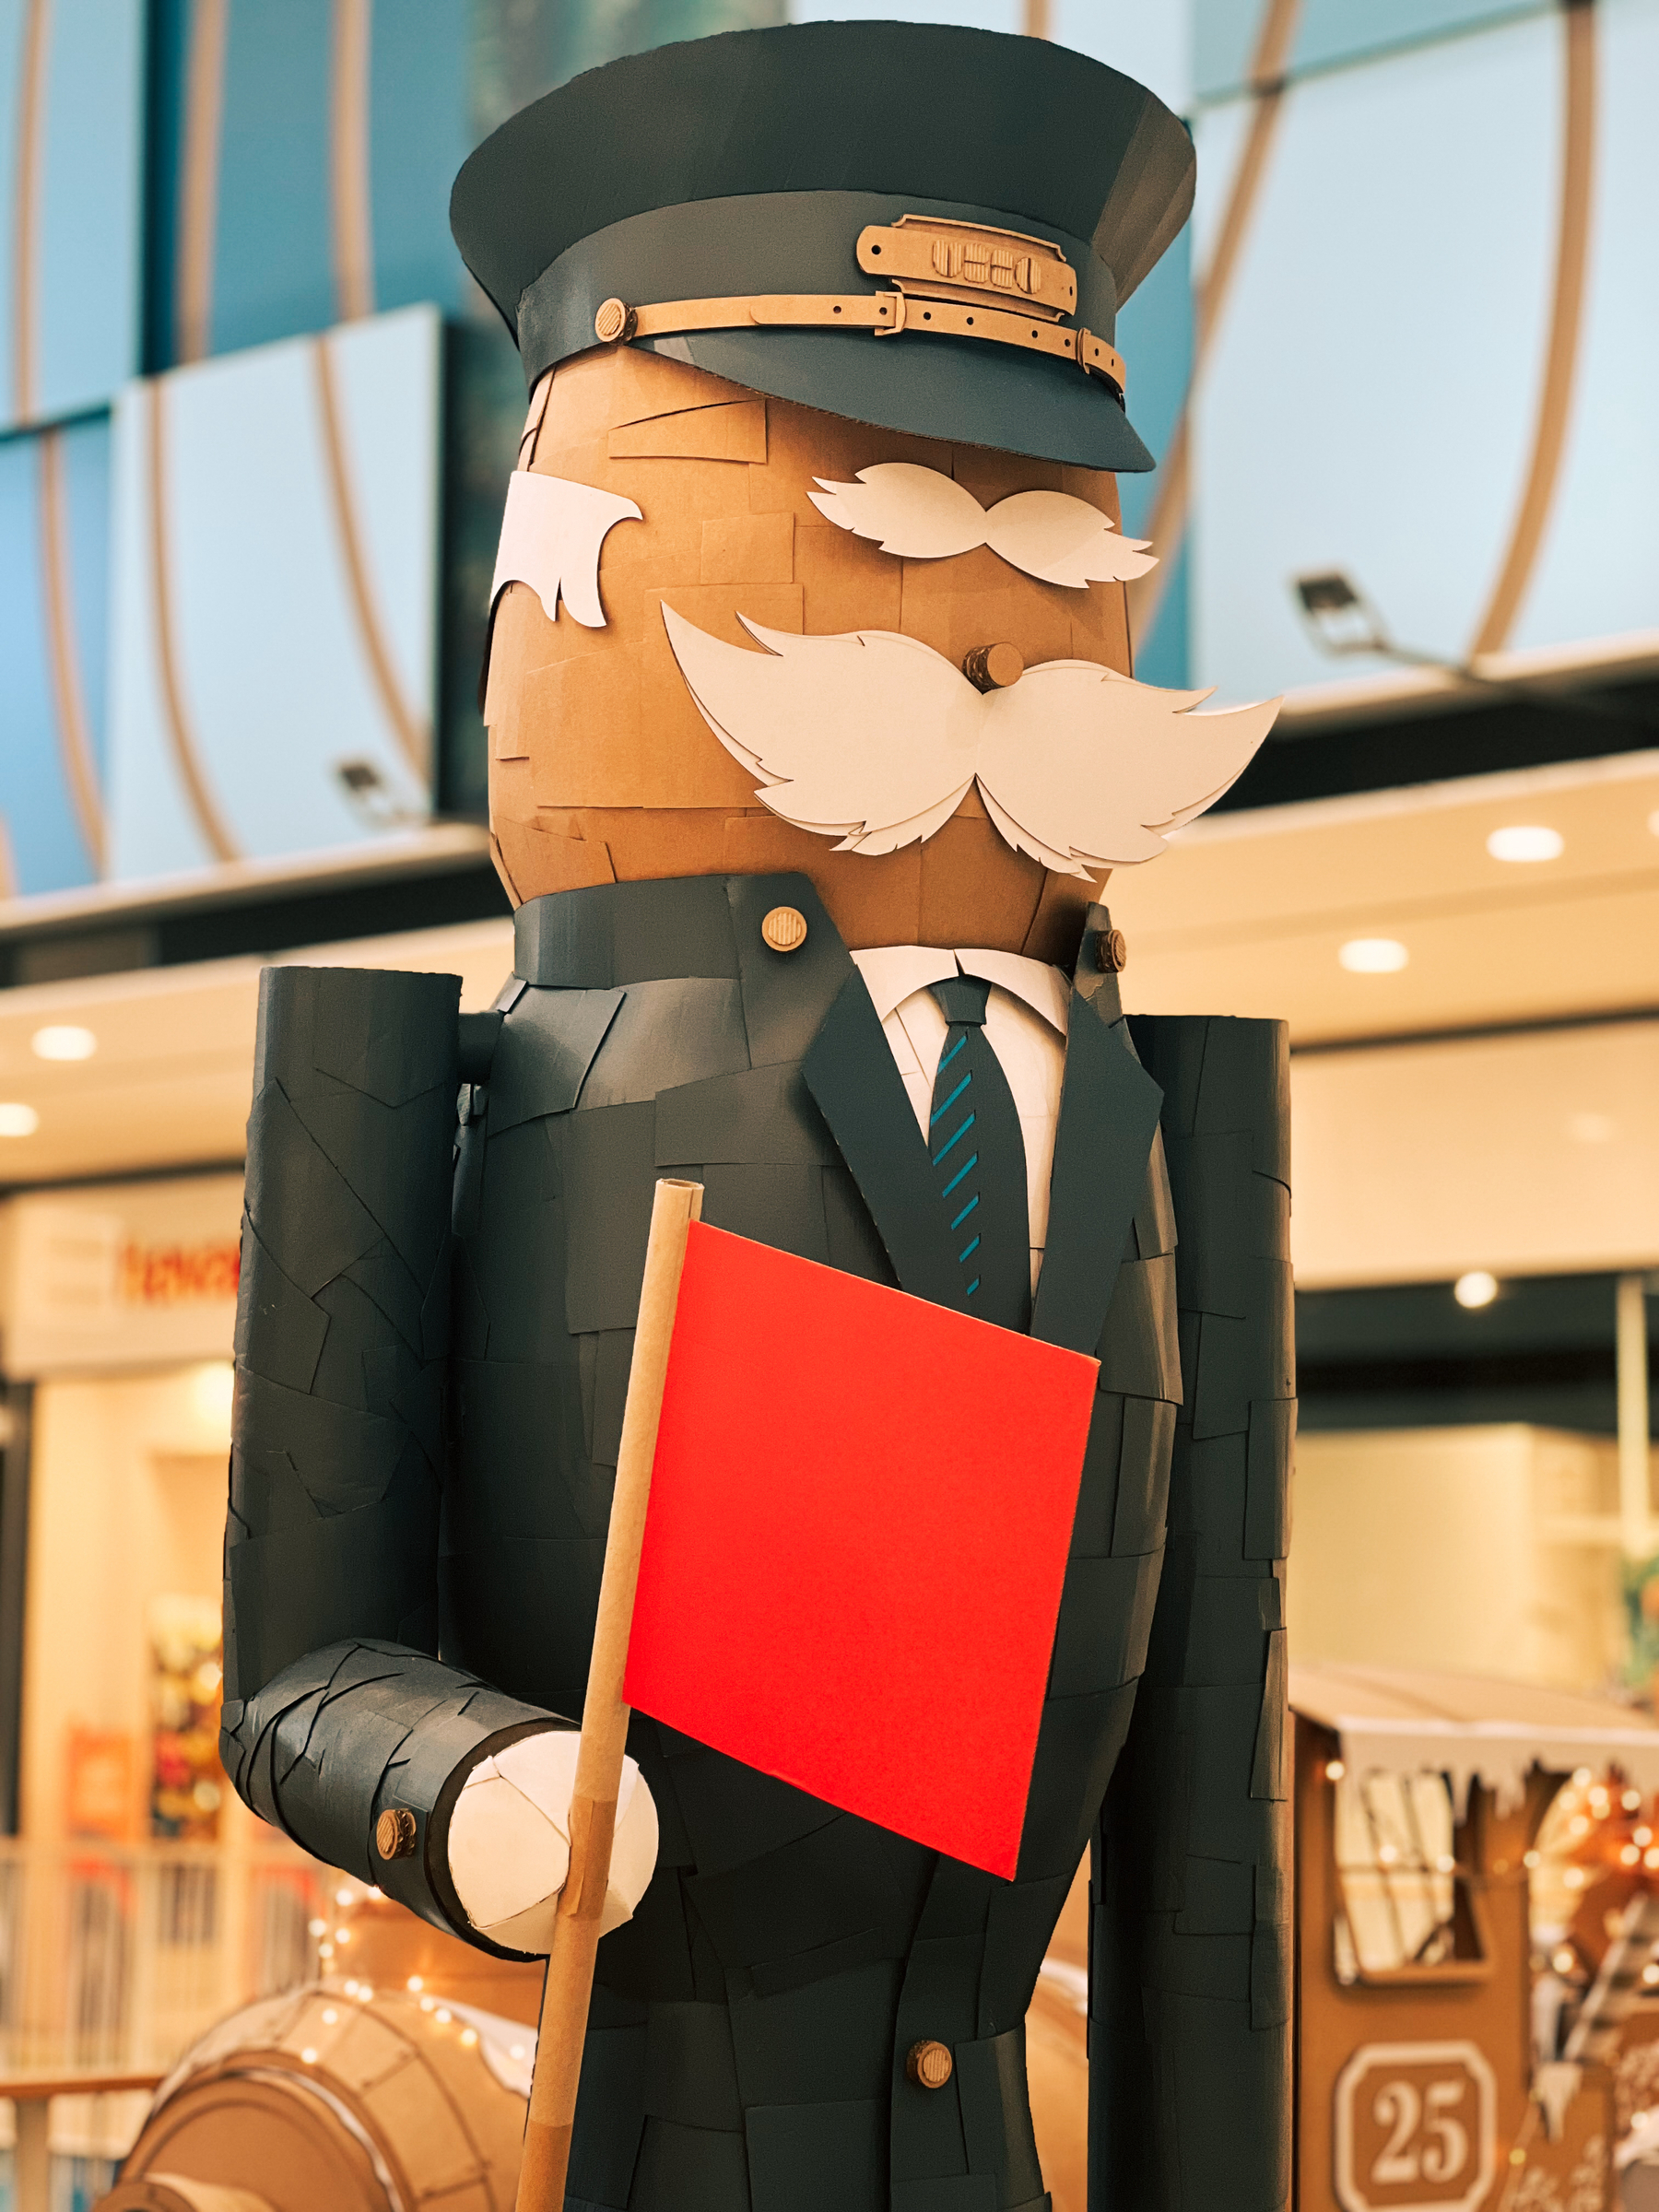 A large, stylized figure made of cardboard resembling a doorman with a mustache, holding a sign, displayed inside a mall setting.